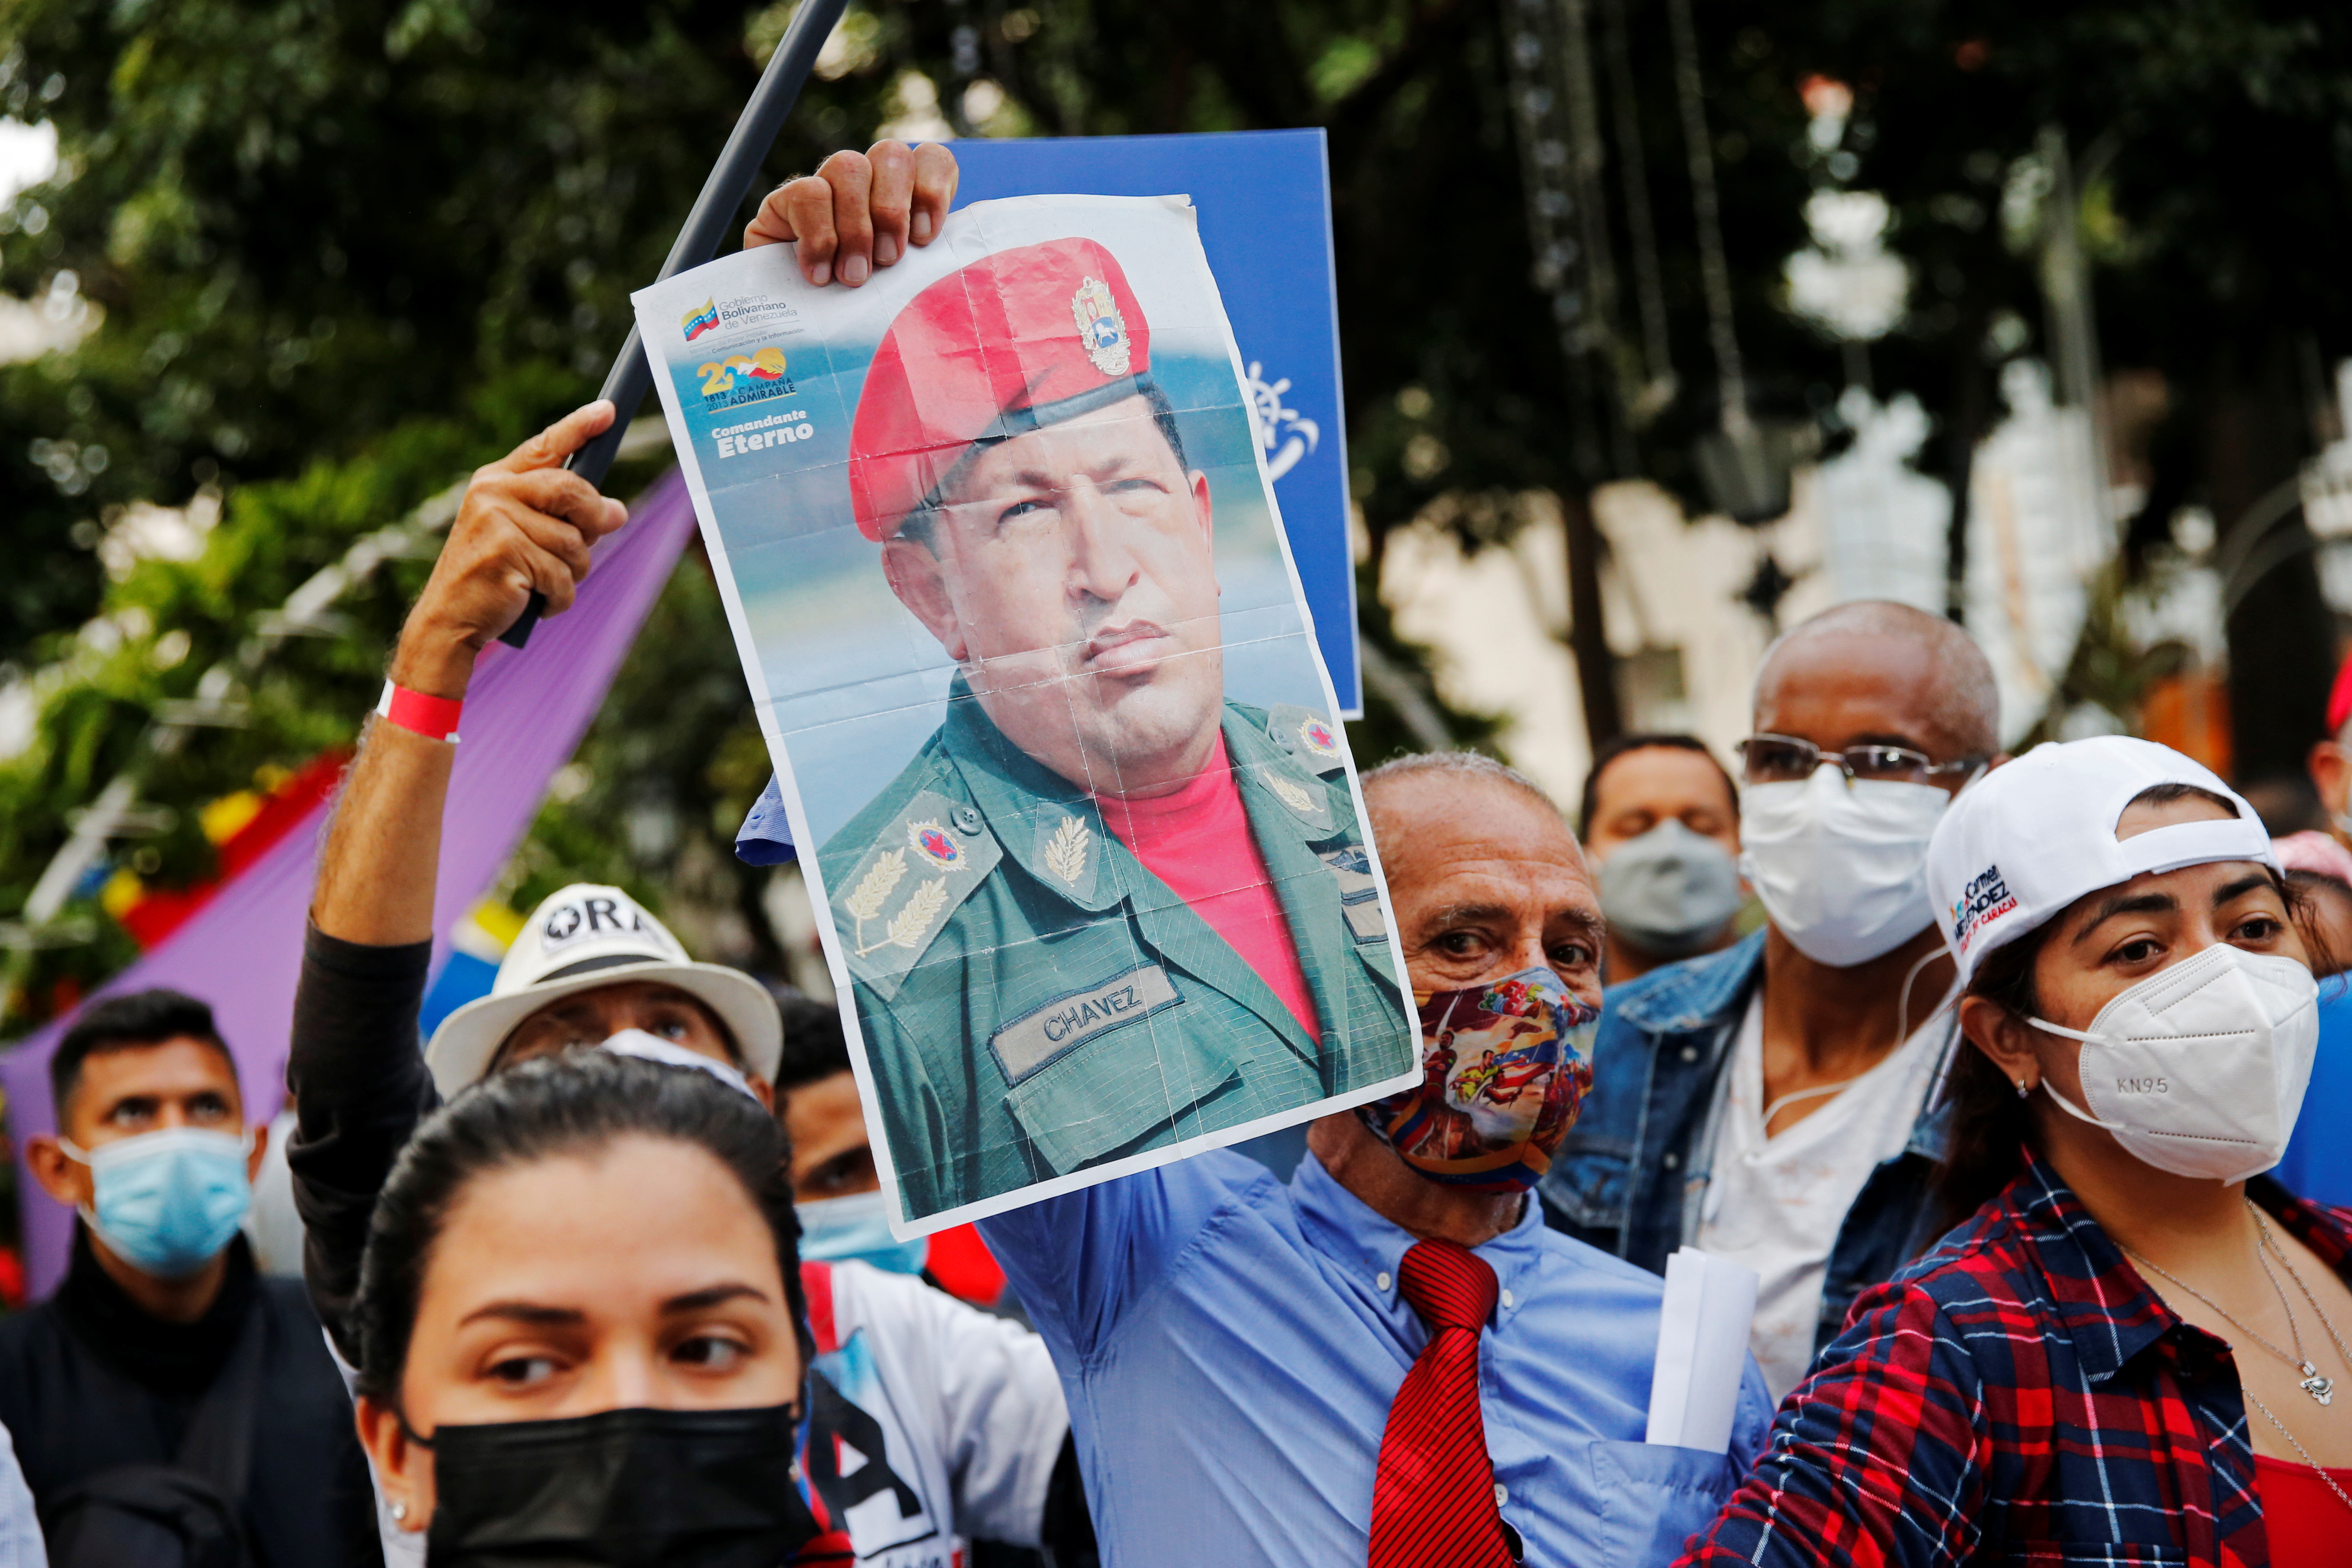 A pro-government supporter holds a poster of late Venezuelan president Hugo Chavez during an event by Carmen Melendez, the ruling party's candidate for mayor of Caracas, in Caracas, Venezuela October 29, 2021.   REUTERS/Leonardo Fernandez Viloria